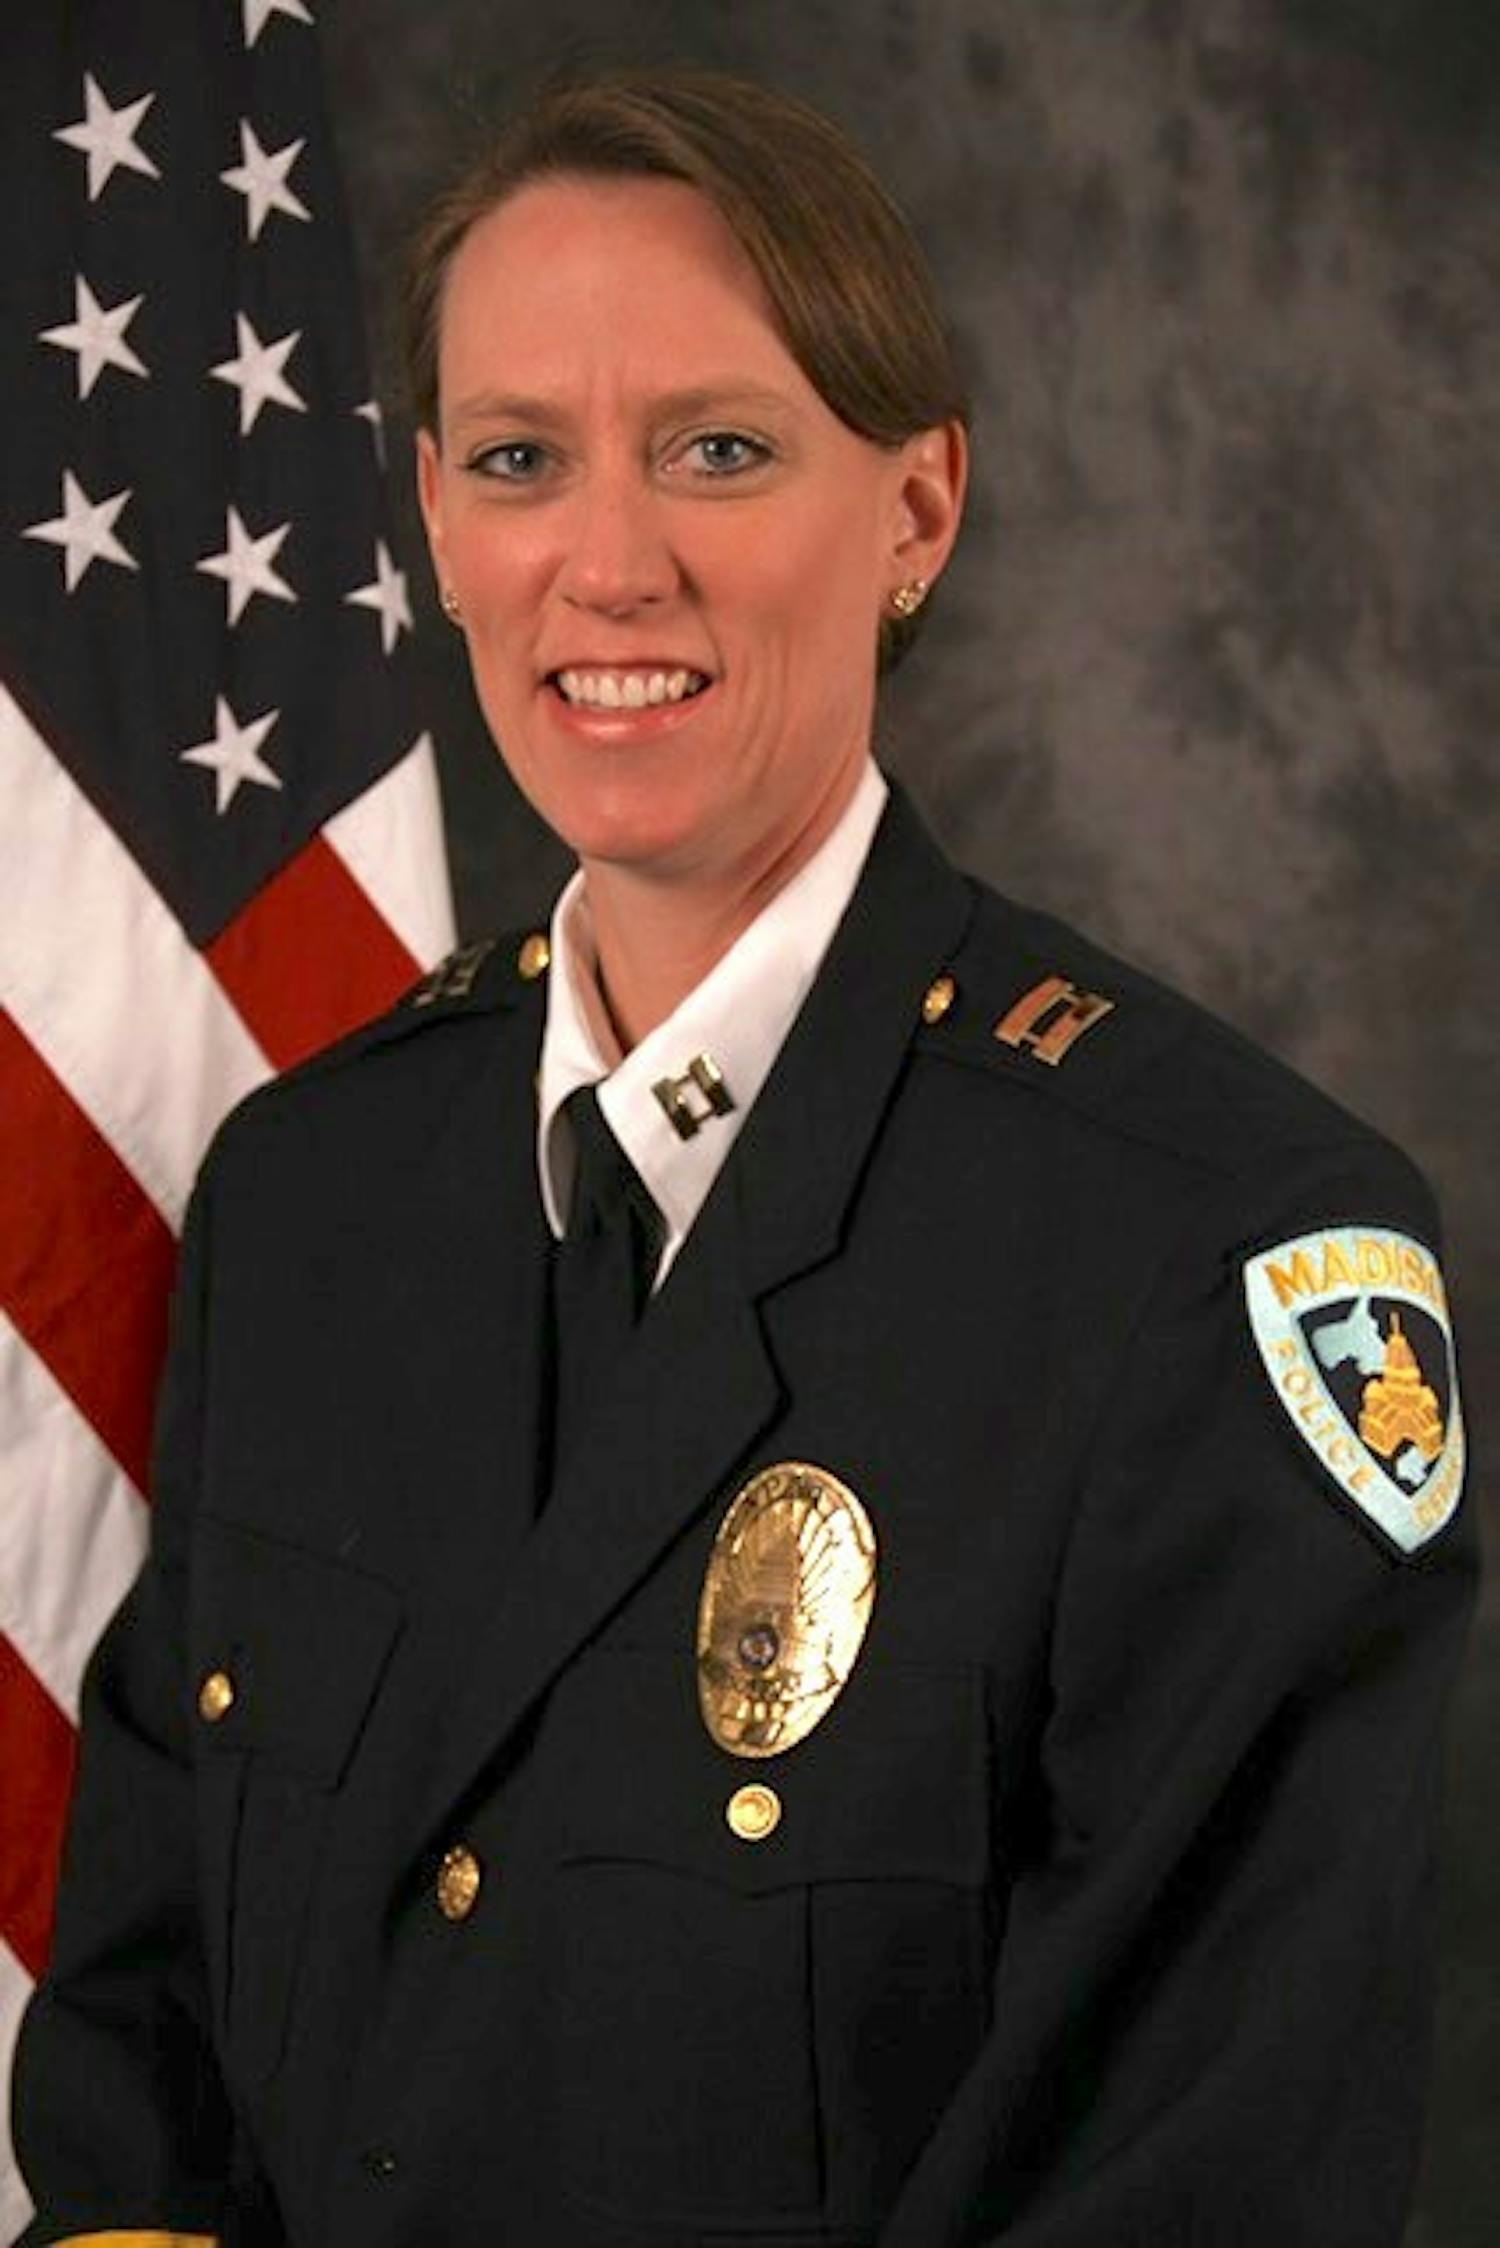 Kristen Roman, a City of Madison Police Department captain, will begin serving as UW-Madison Police Department Chief in January.